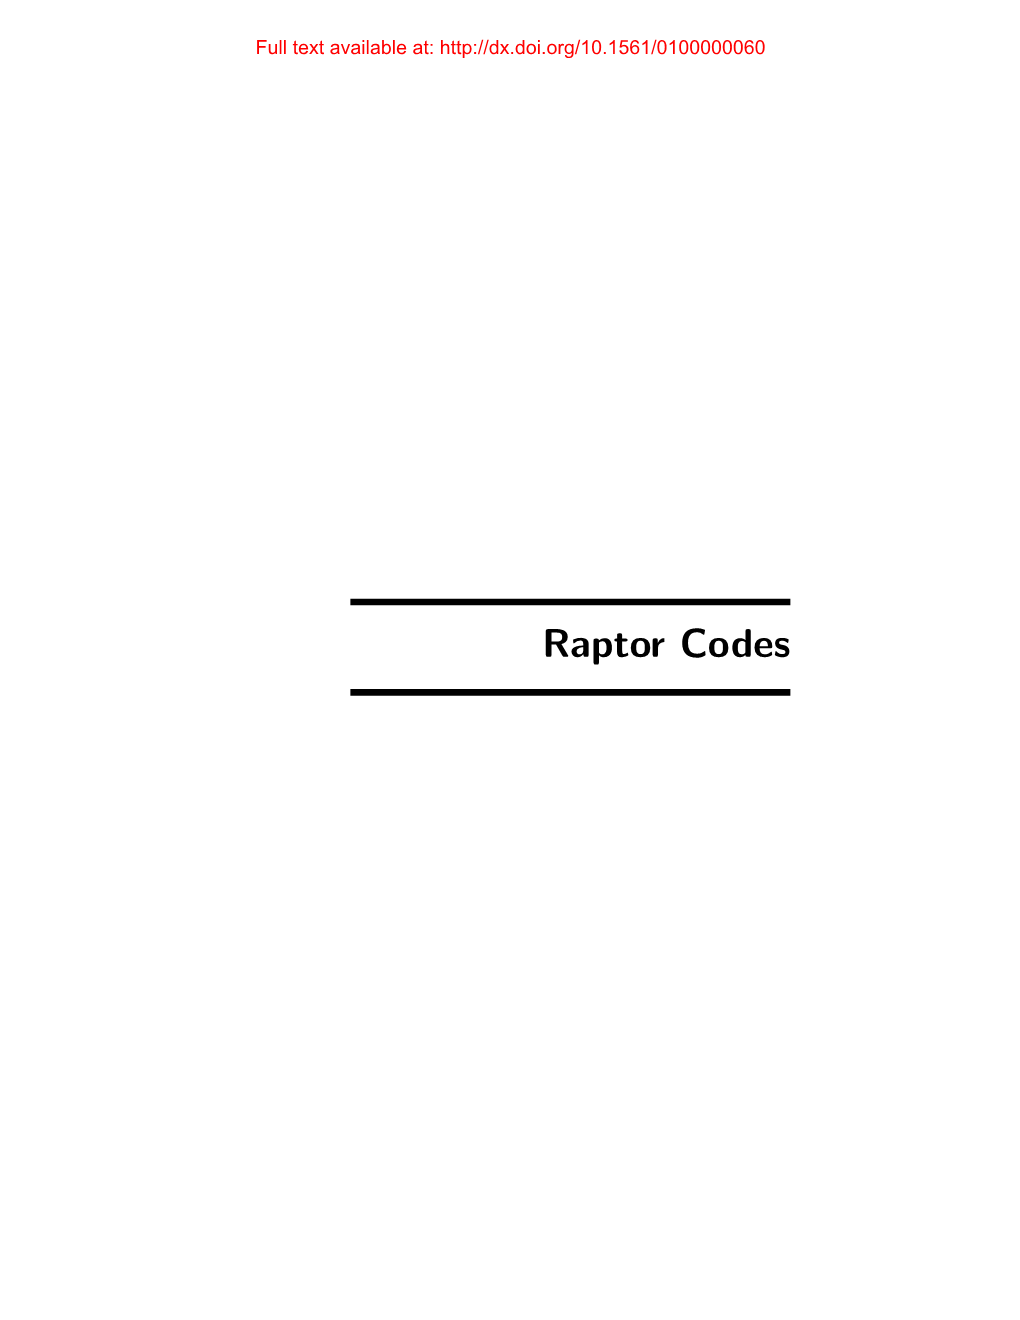 Raptor Codes Full Text Available At